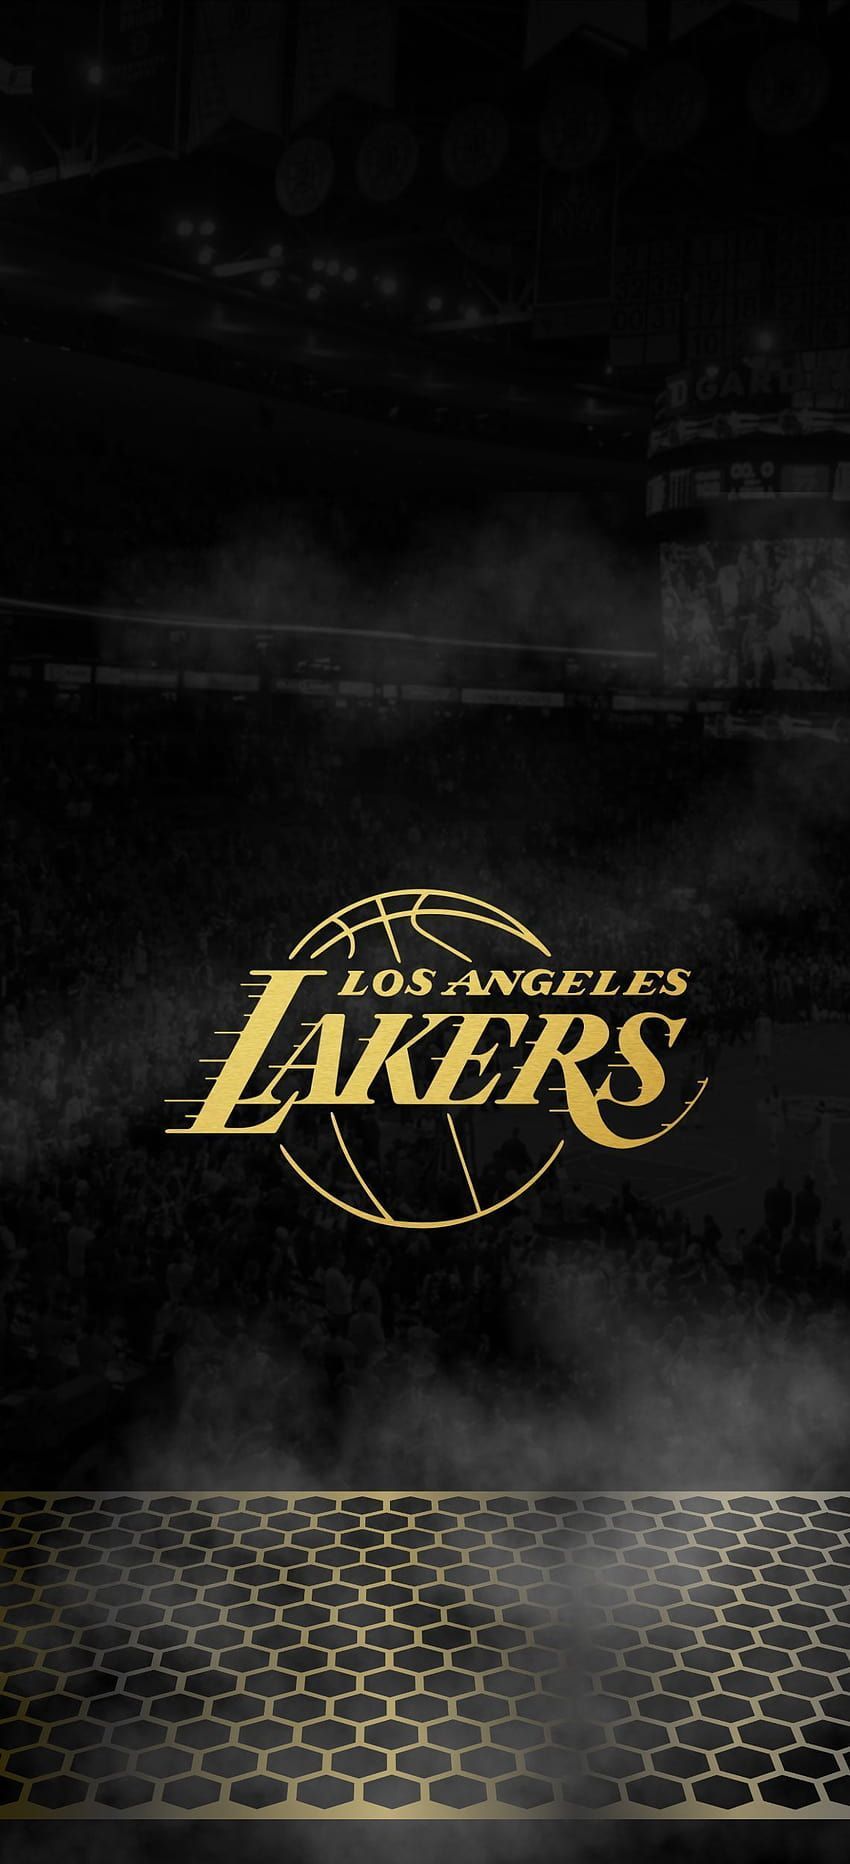 Lakers wallpaper for iPhone with high-resolution 1080x1920 pixel. You can use this wallpaper for your iPhone 5, 6, 7, 8, X, XS, XR backgrounds, Mobile Screensaver, or iPad Lock Screen - Los Angeles Lakers